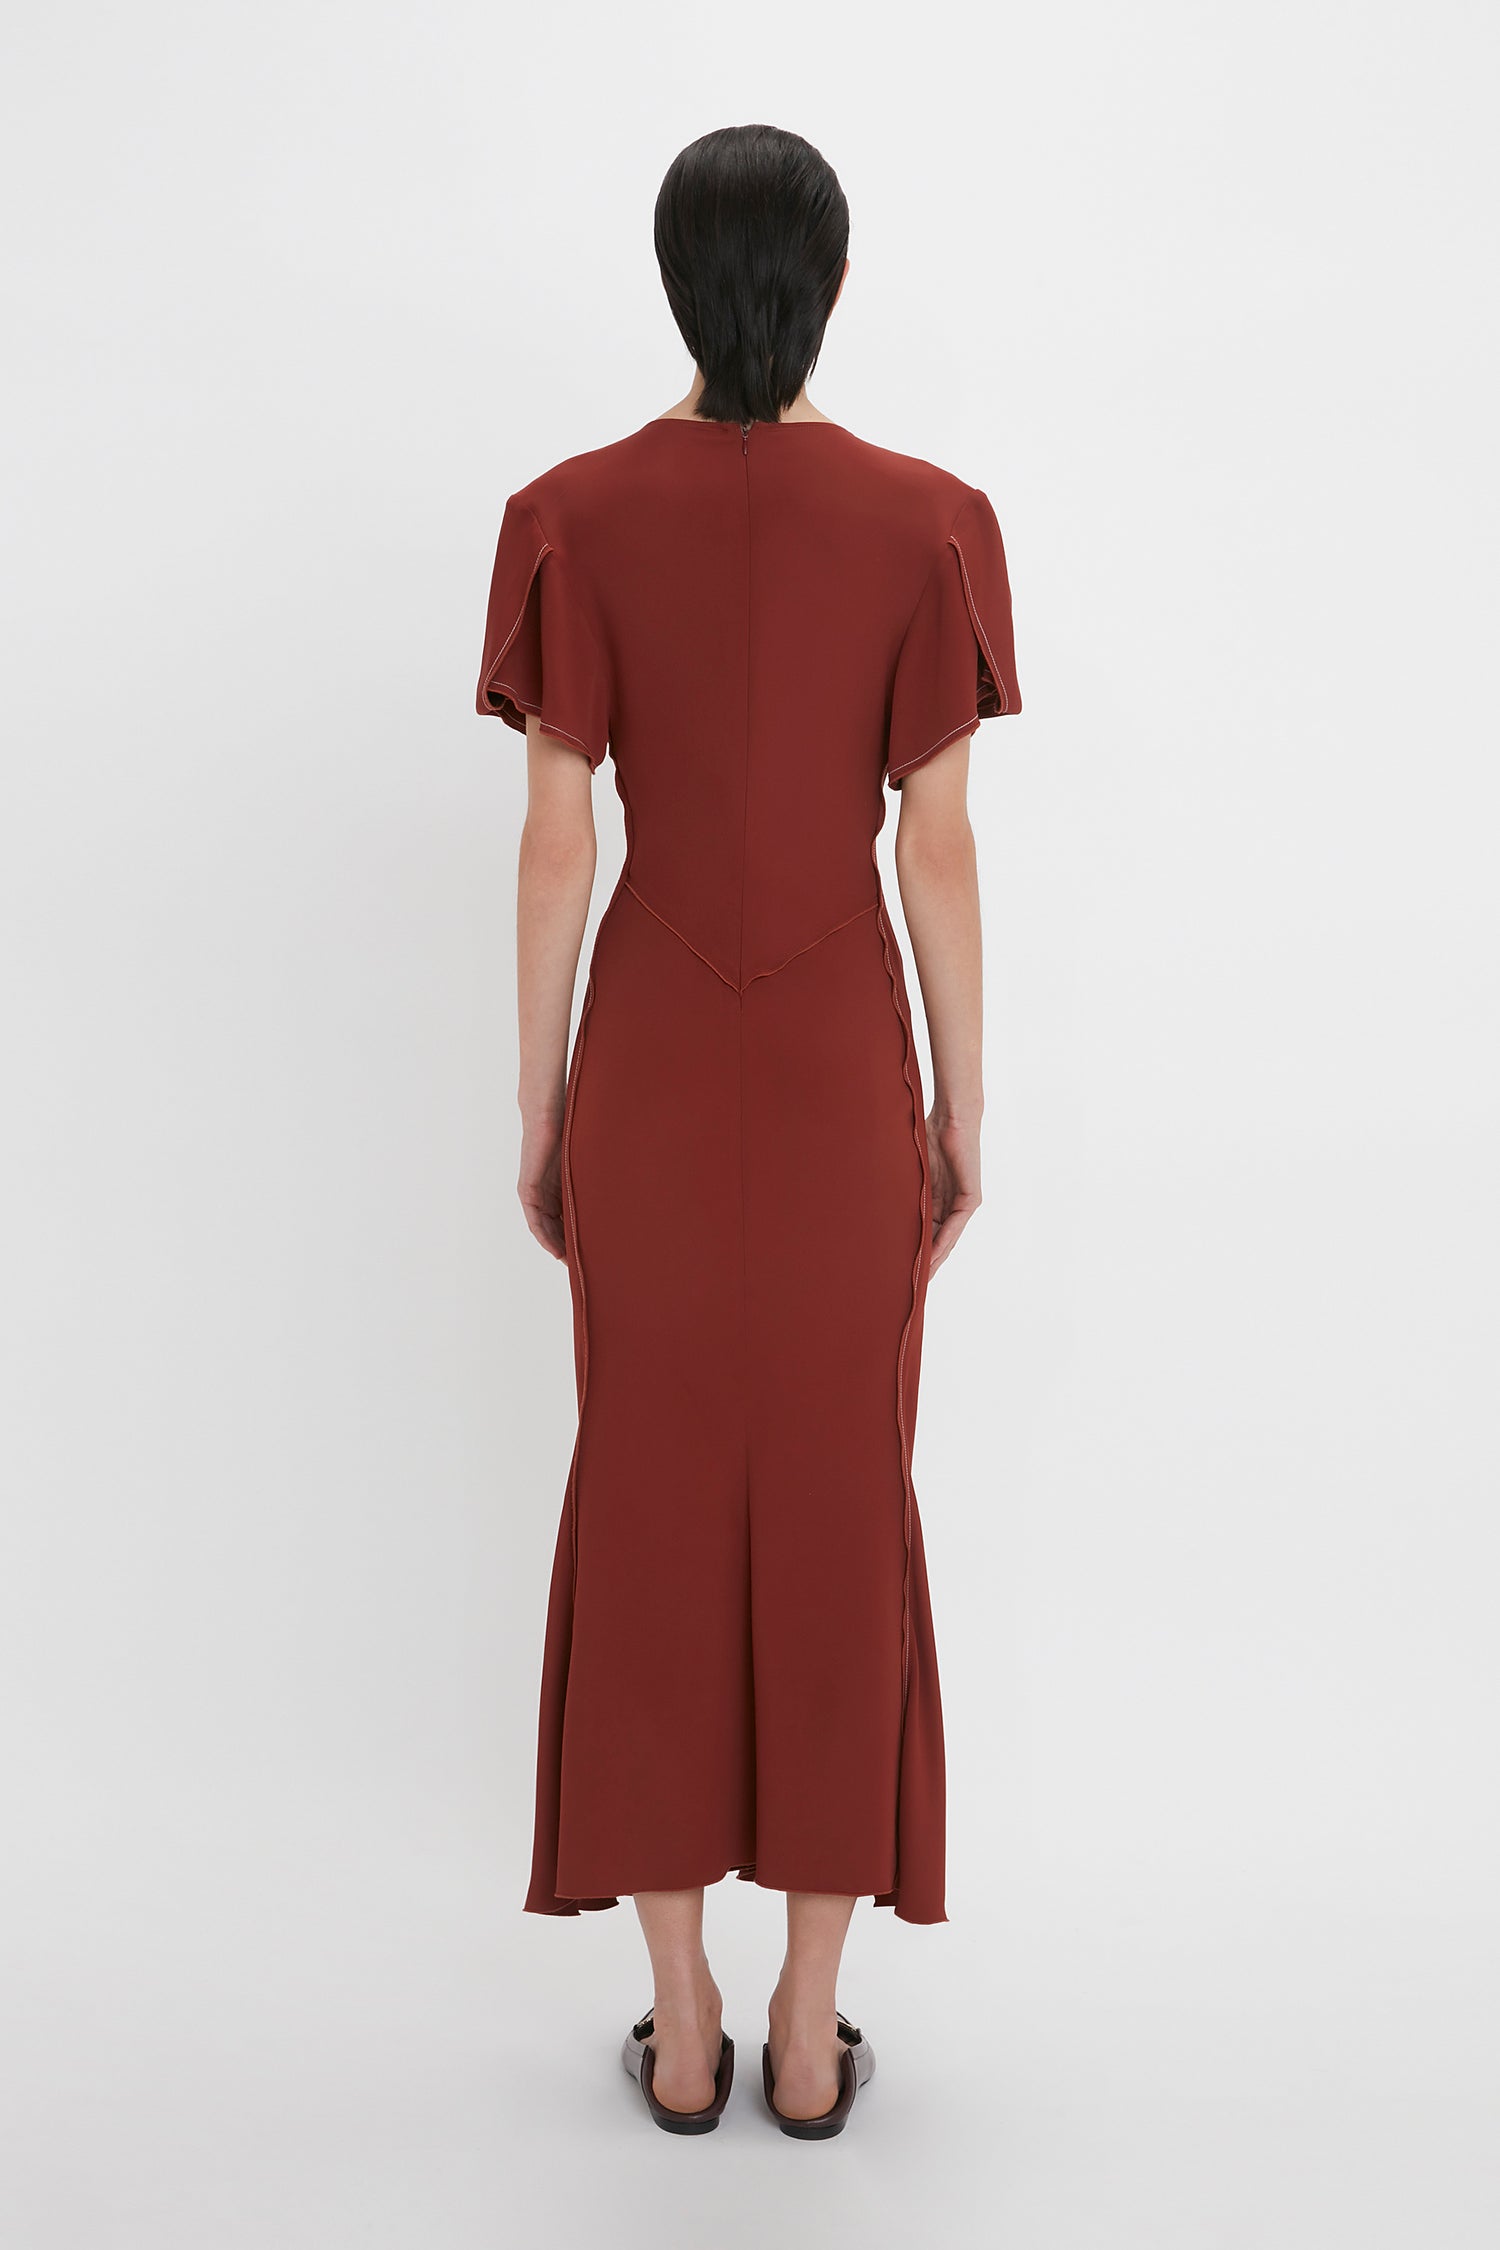 Person with short, dark hair wearing the Gathered V-Neck Midi Dress In Russet by Victoria Beckham, photographed from the back against a plain white background.